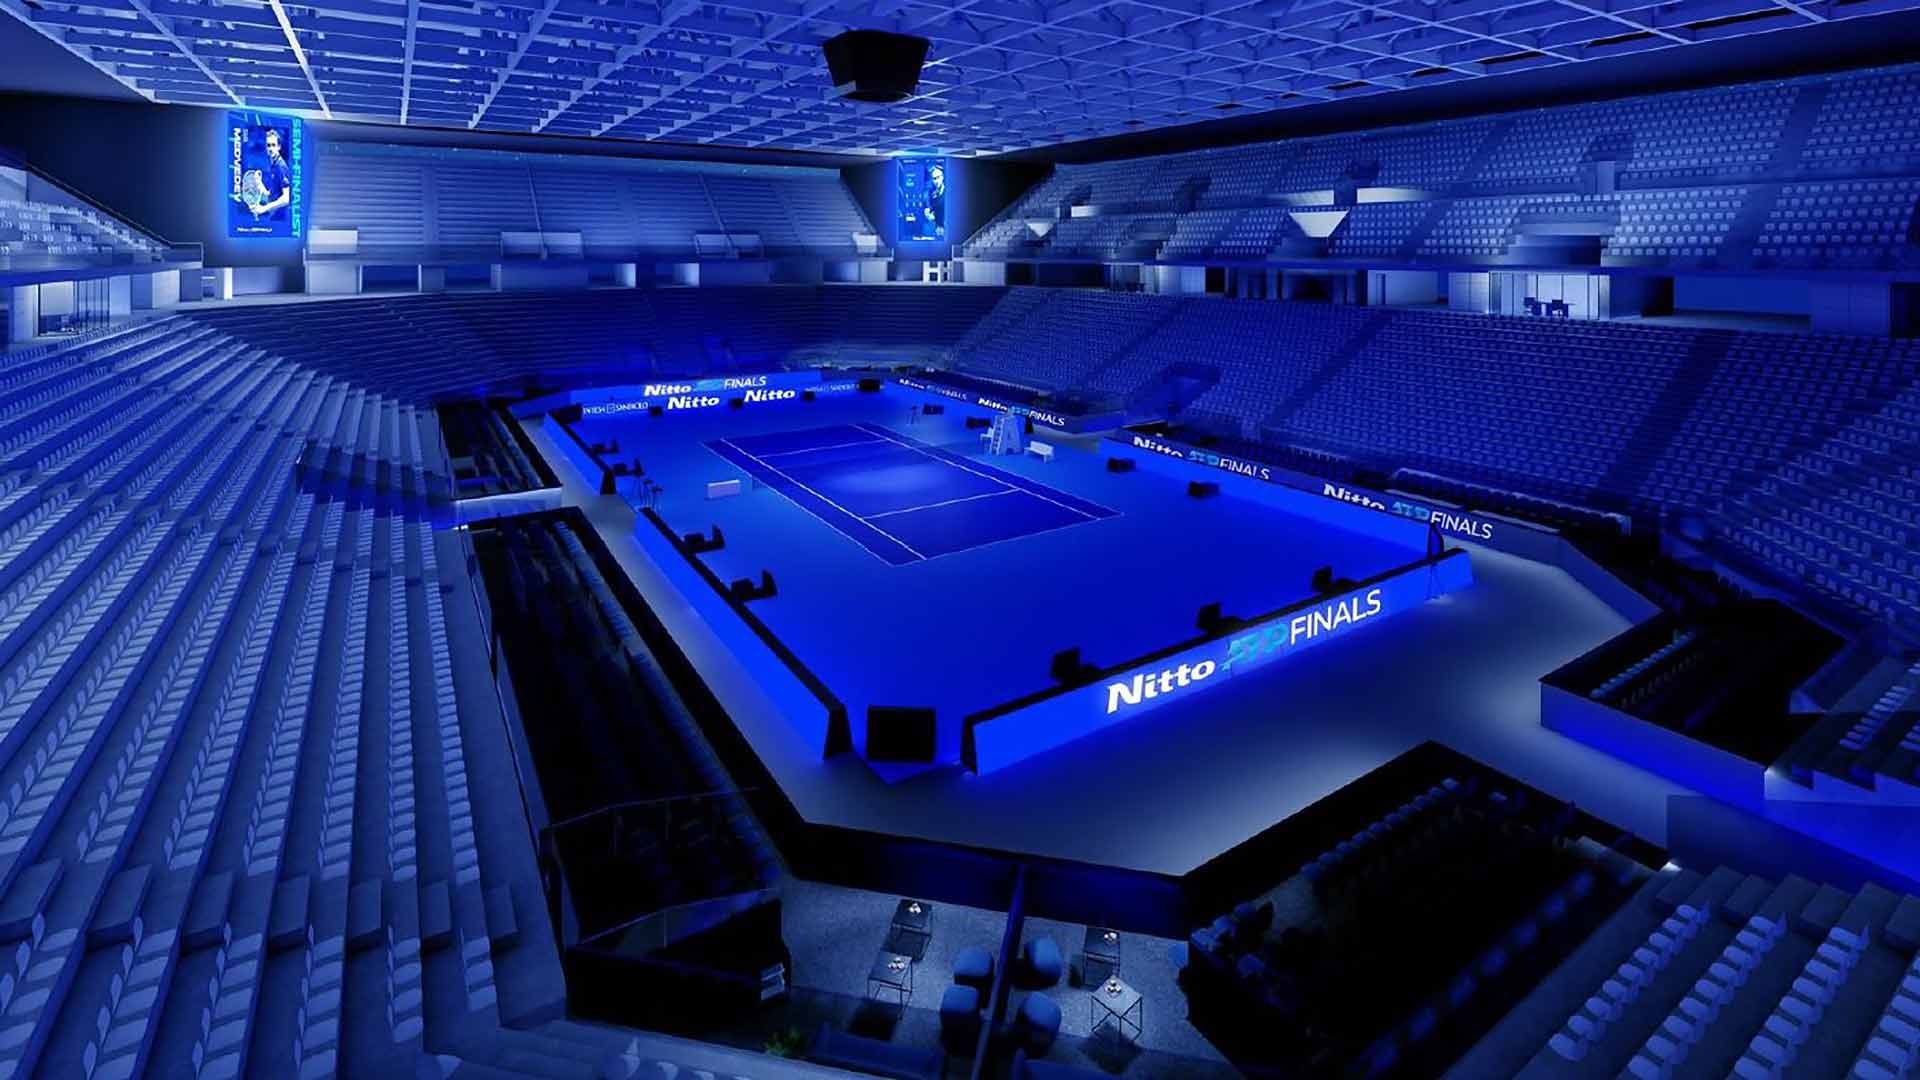 2022 Nitto ATP Finals Presented In Turin